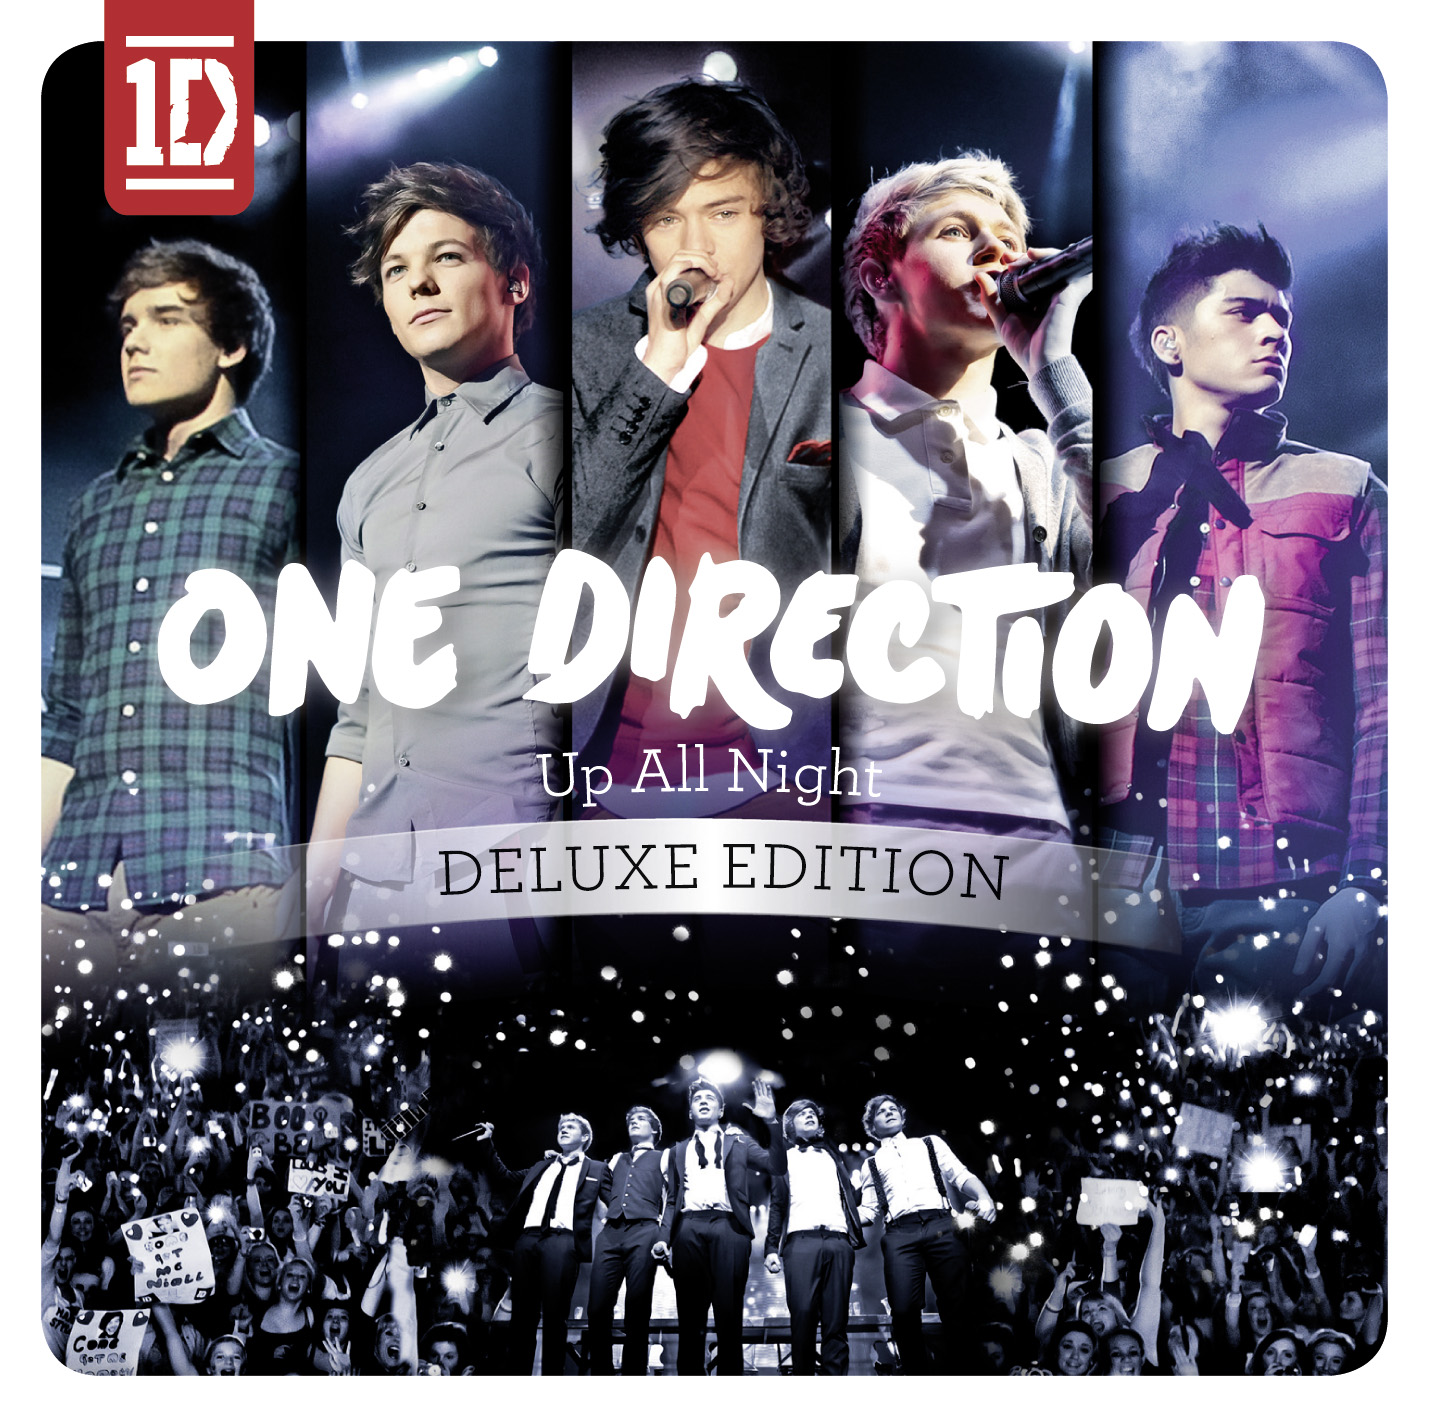 http://img4.wikia.nocookie.net/__cb20130403042226/onedirectioninfection/images/b/b1/One_Direction_Up_All_Night_DELUXE_Edition_Cover.jpg